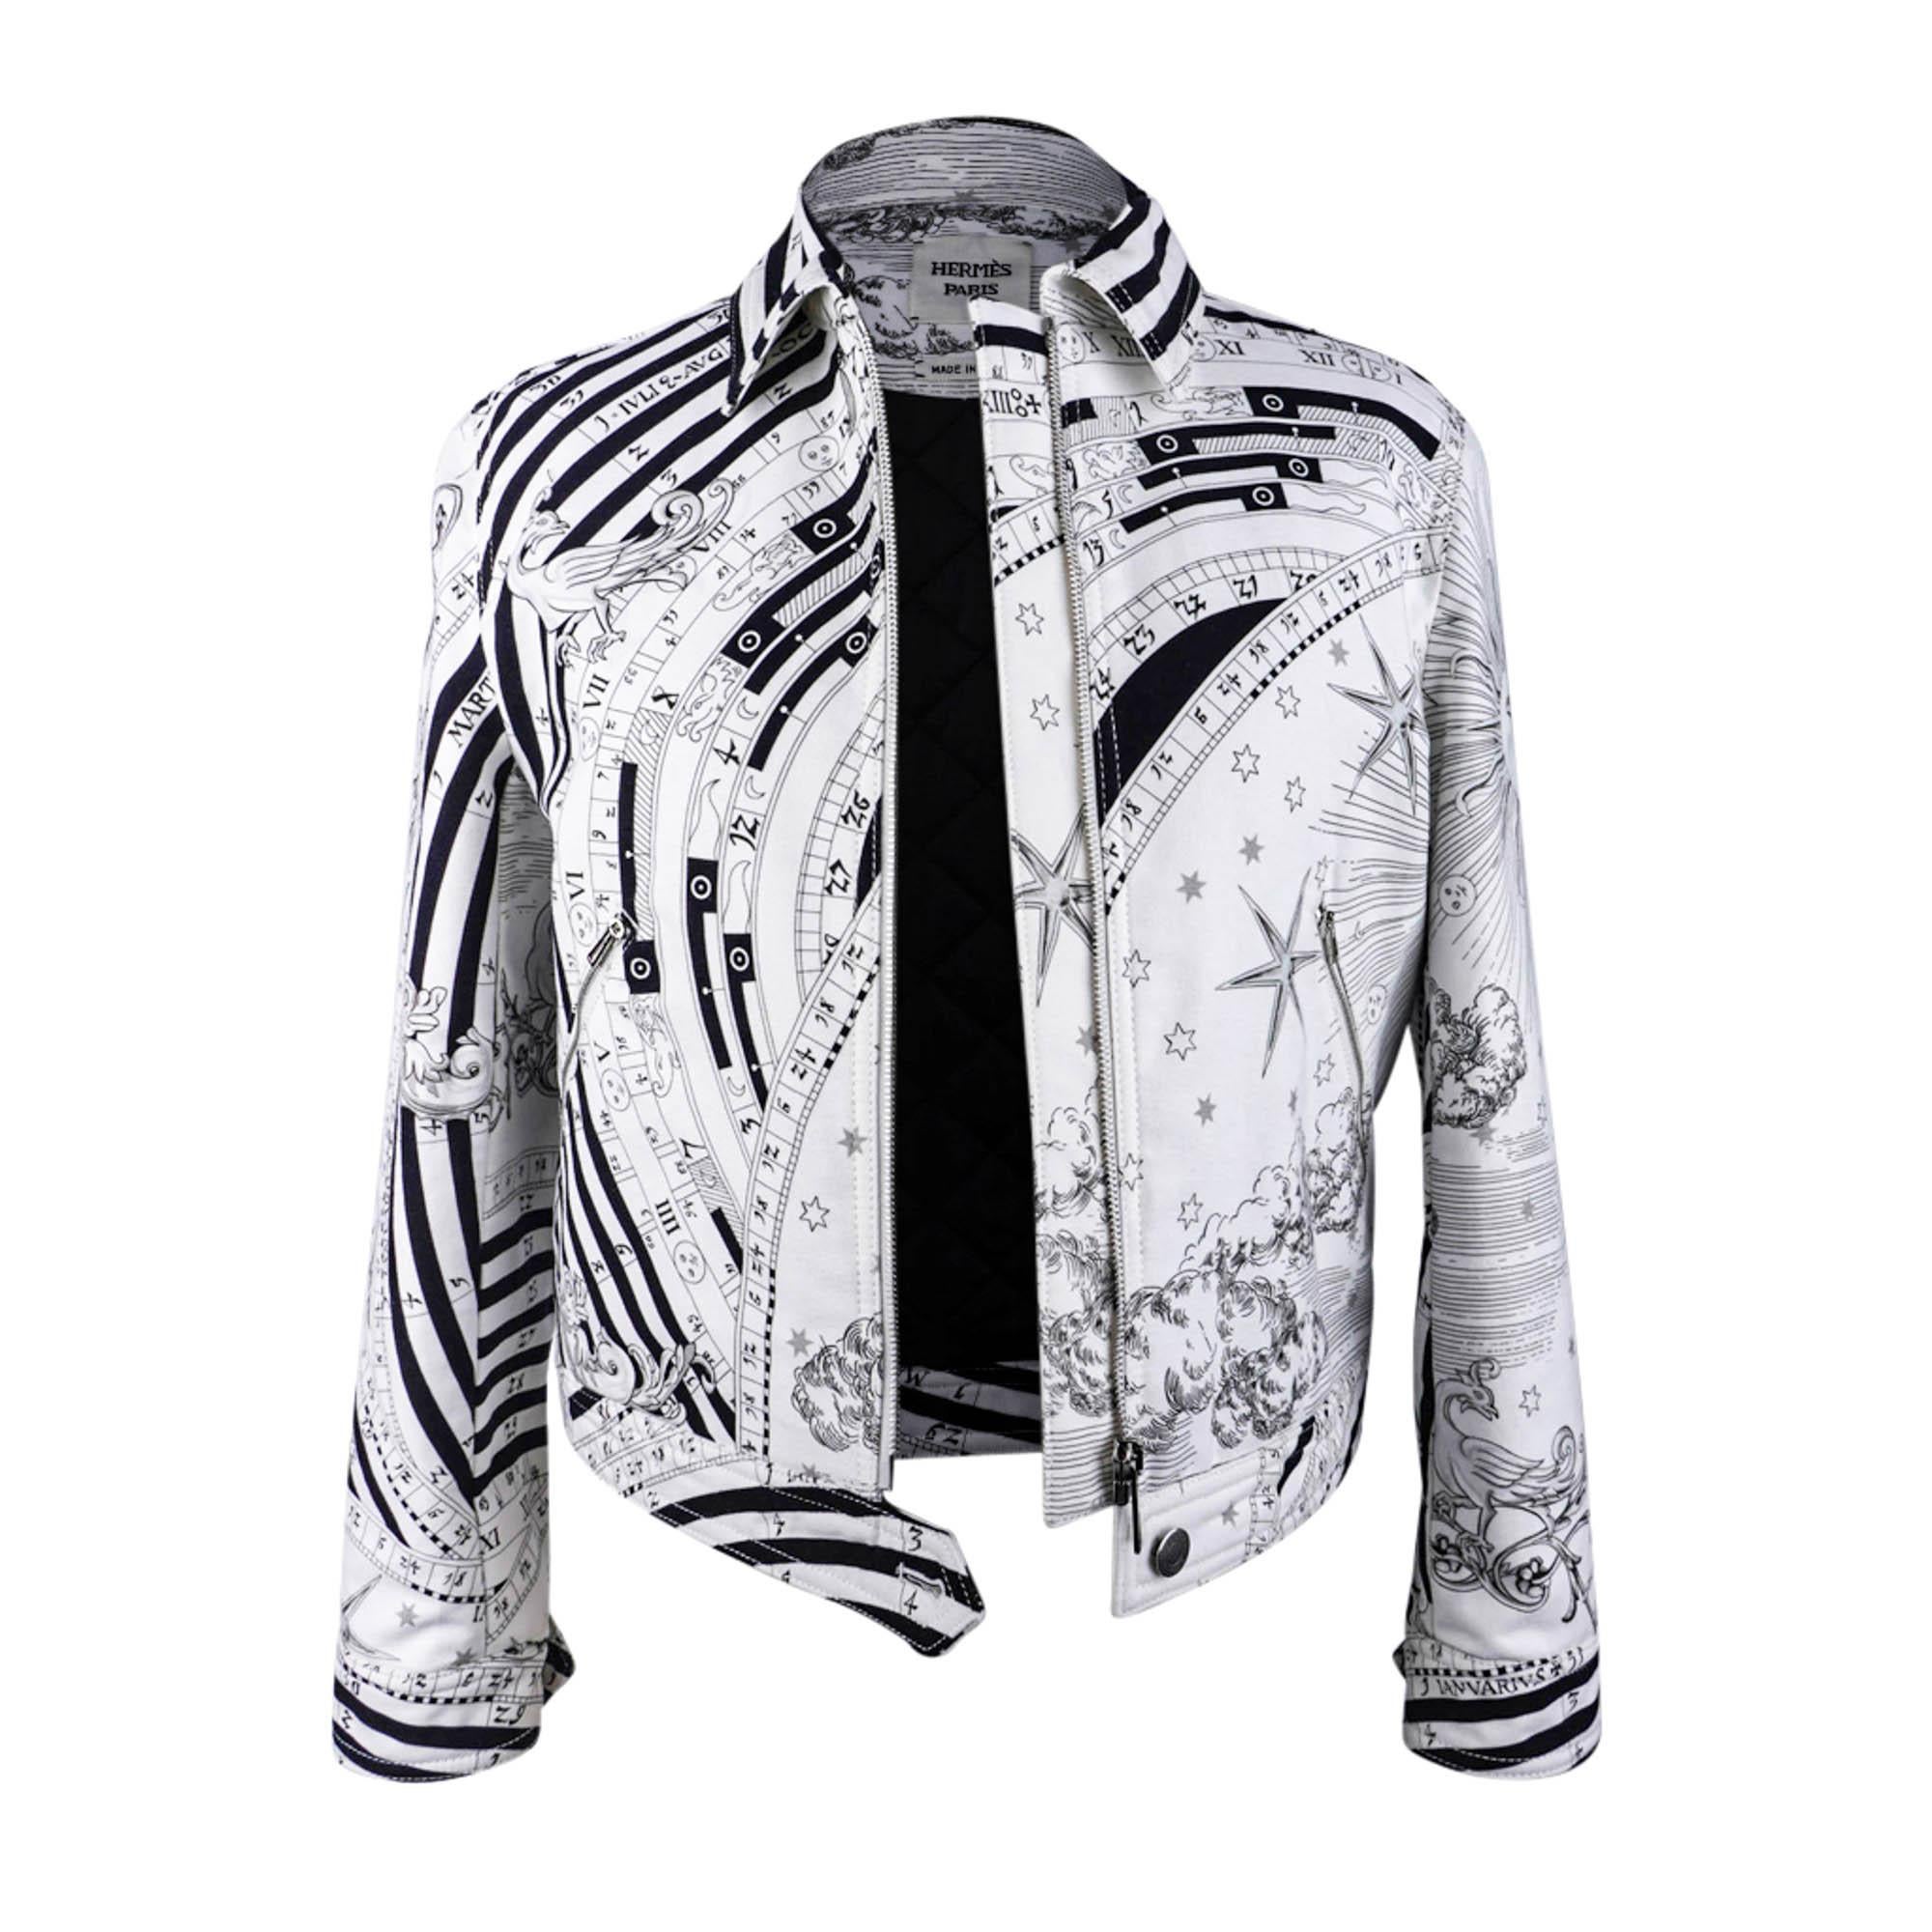 Mightychic offers an Hermes Brides De Gala Bandana bomber jacket featured in Black and White.
Zip front with palladium Touret pull.
Two pockets.
Ribbed cashmere at collar, cuffs and waist.
Fabric is silk.
Lined in Black silk.
NEW or NEVER